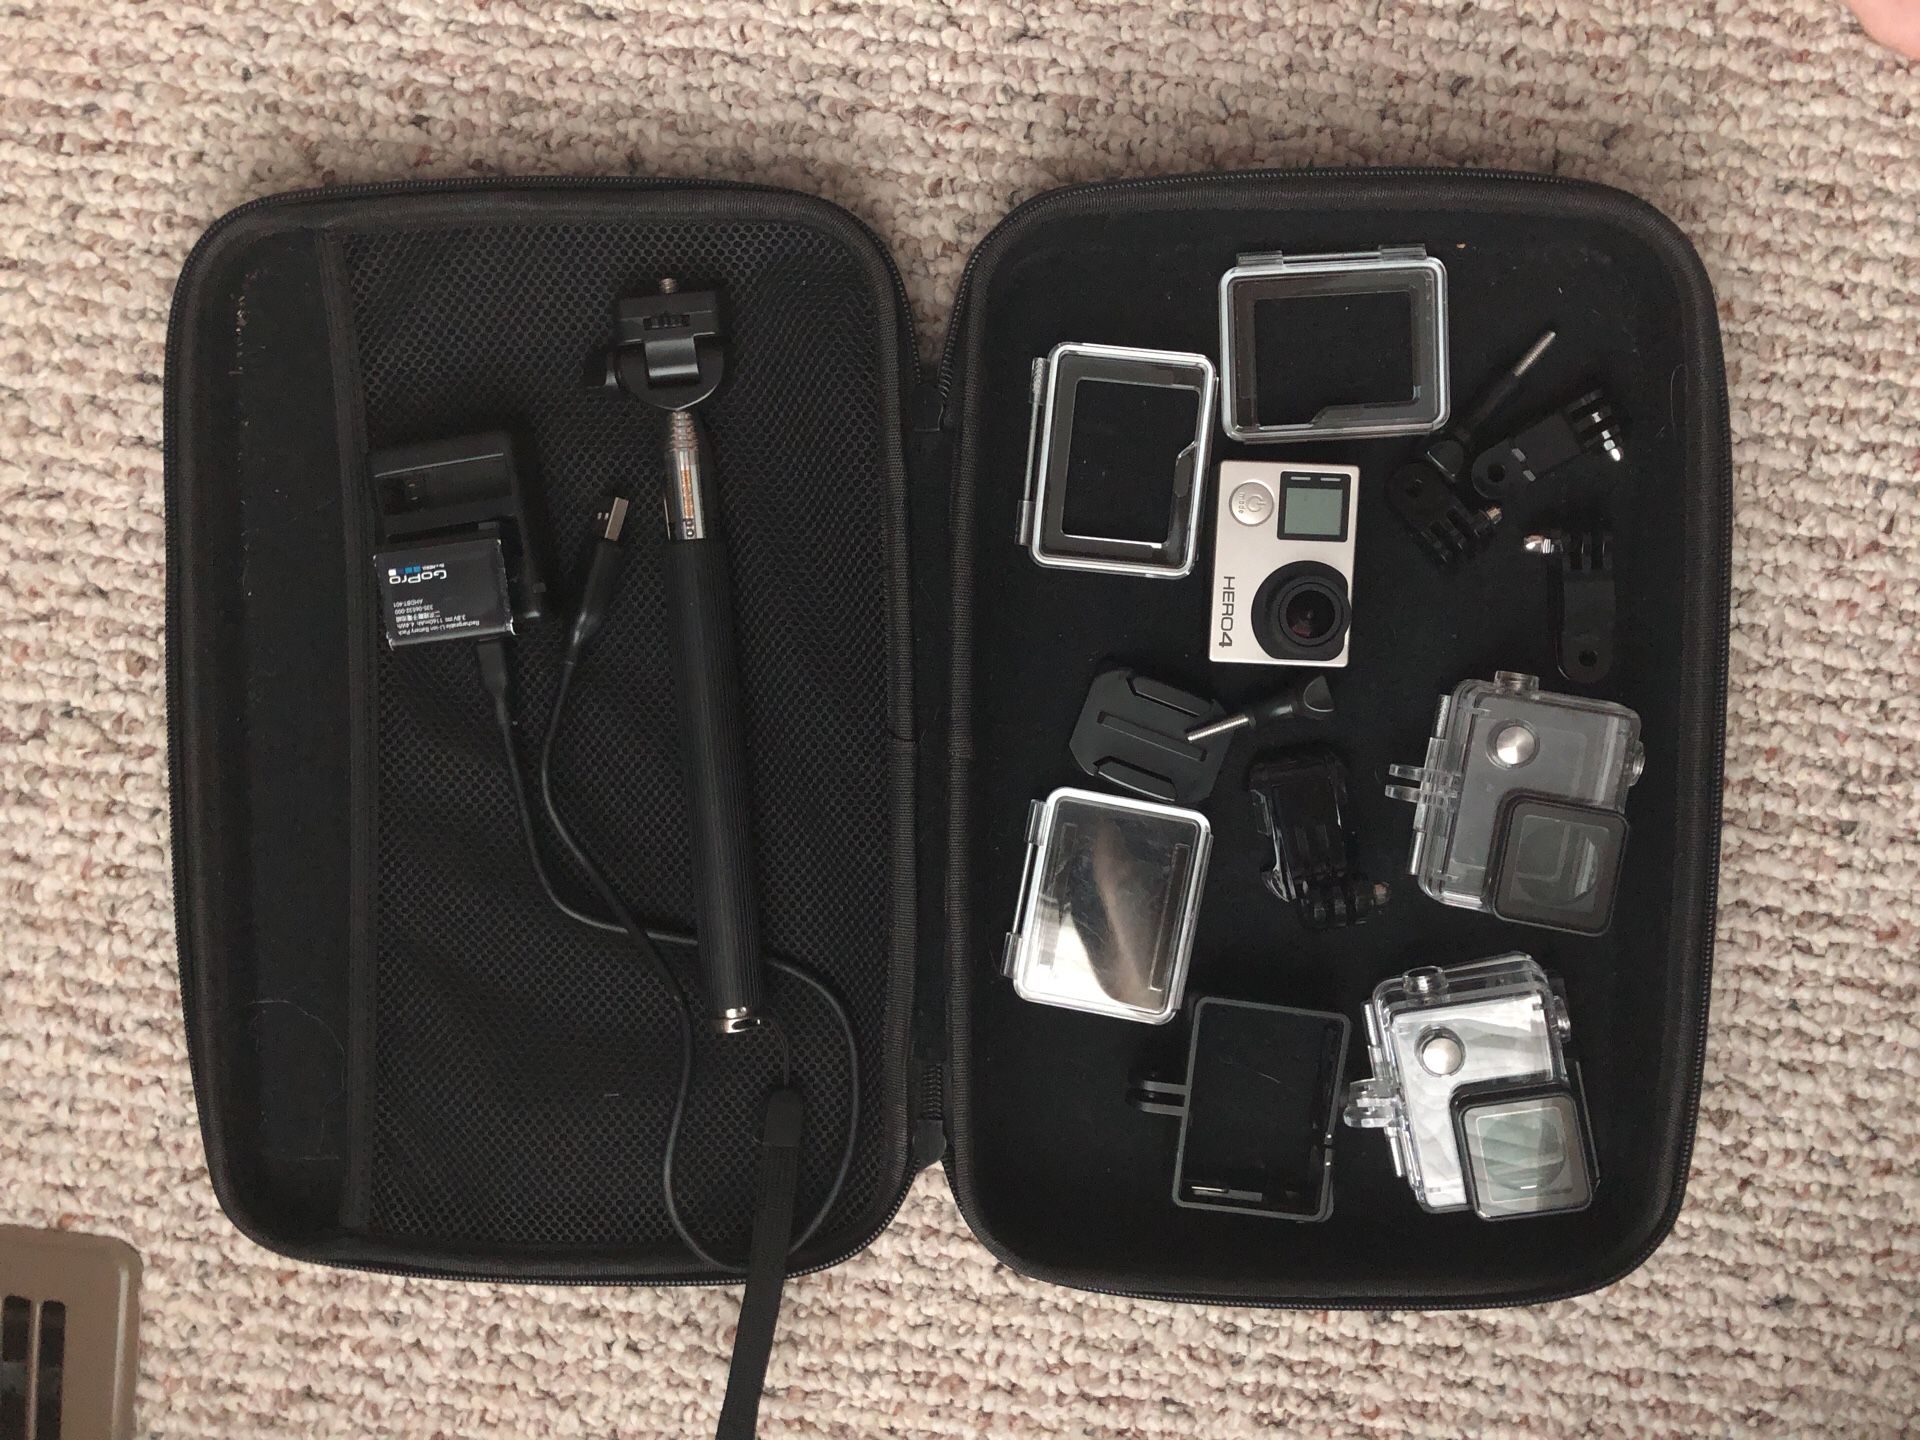 GoPro Hero4 silver with accessories and carrying case